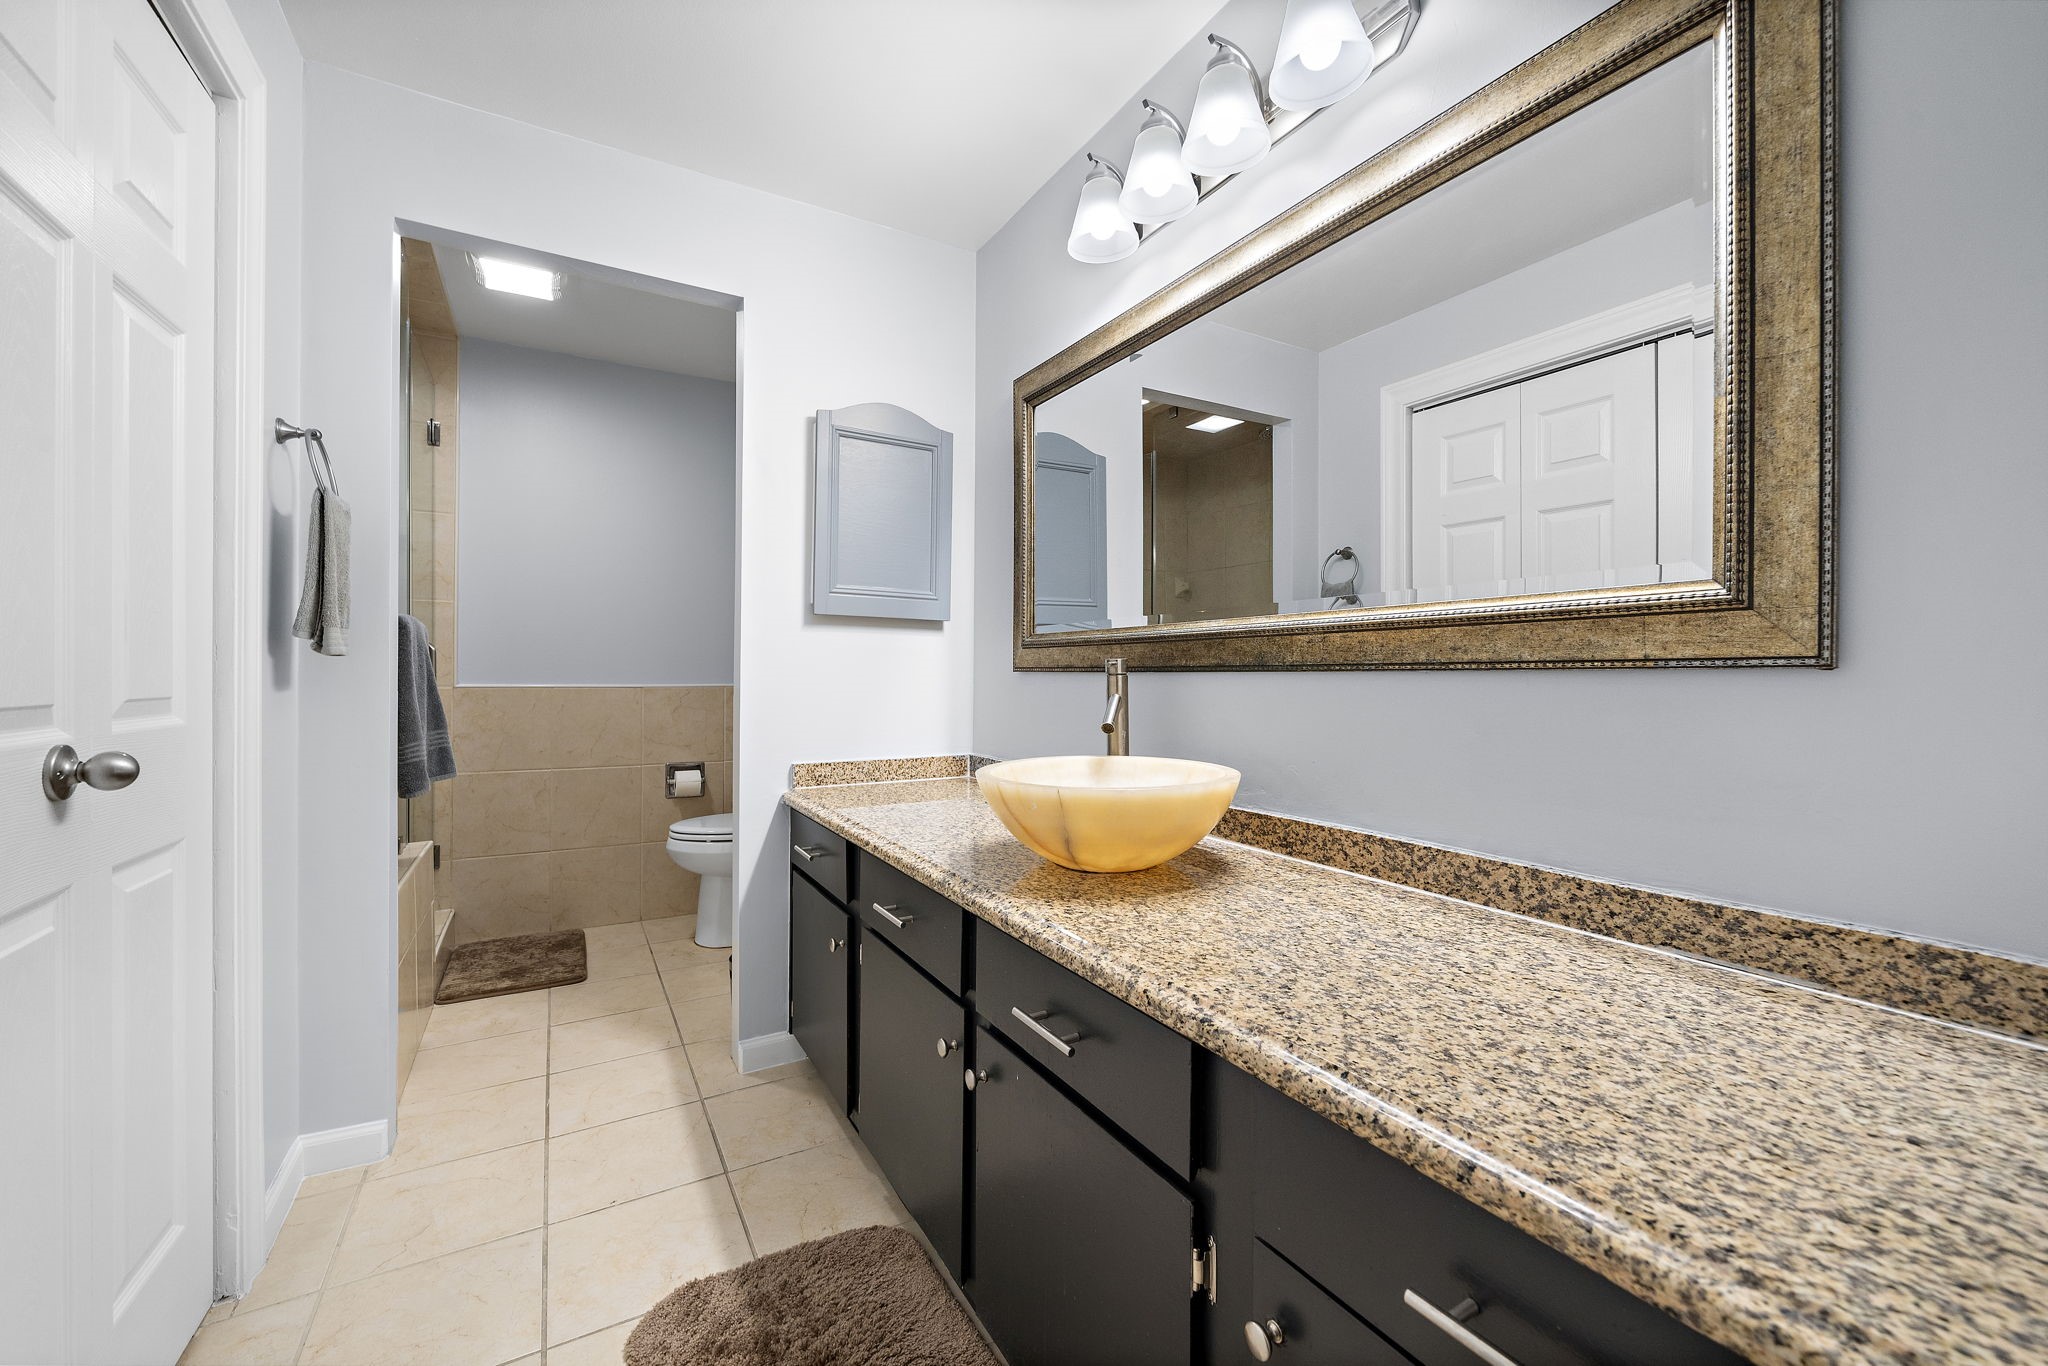 Modern bathroom with dual vanity, granite countertops, large mirror, and a separate toilet area.